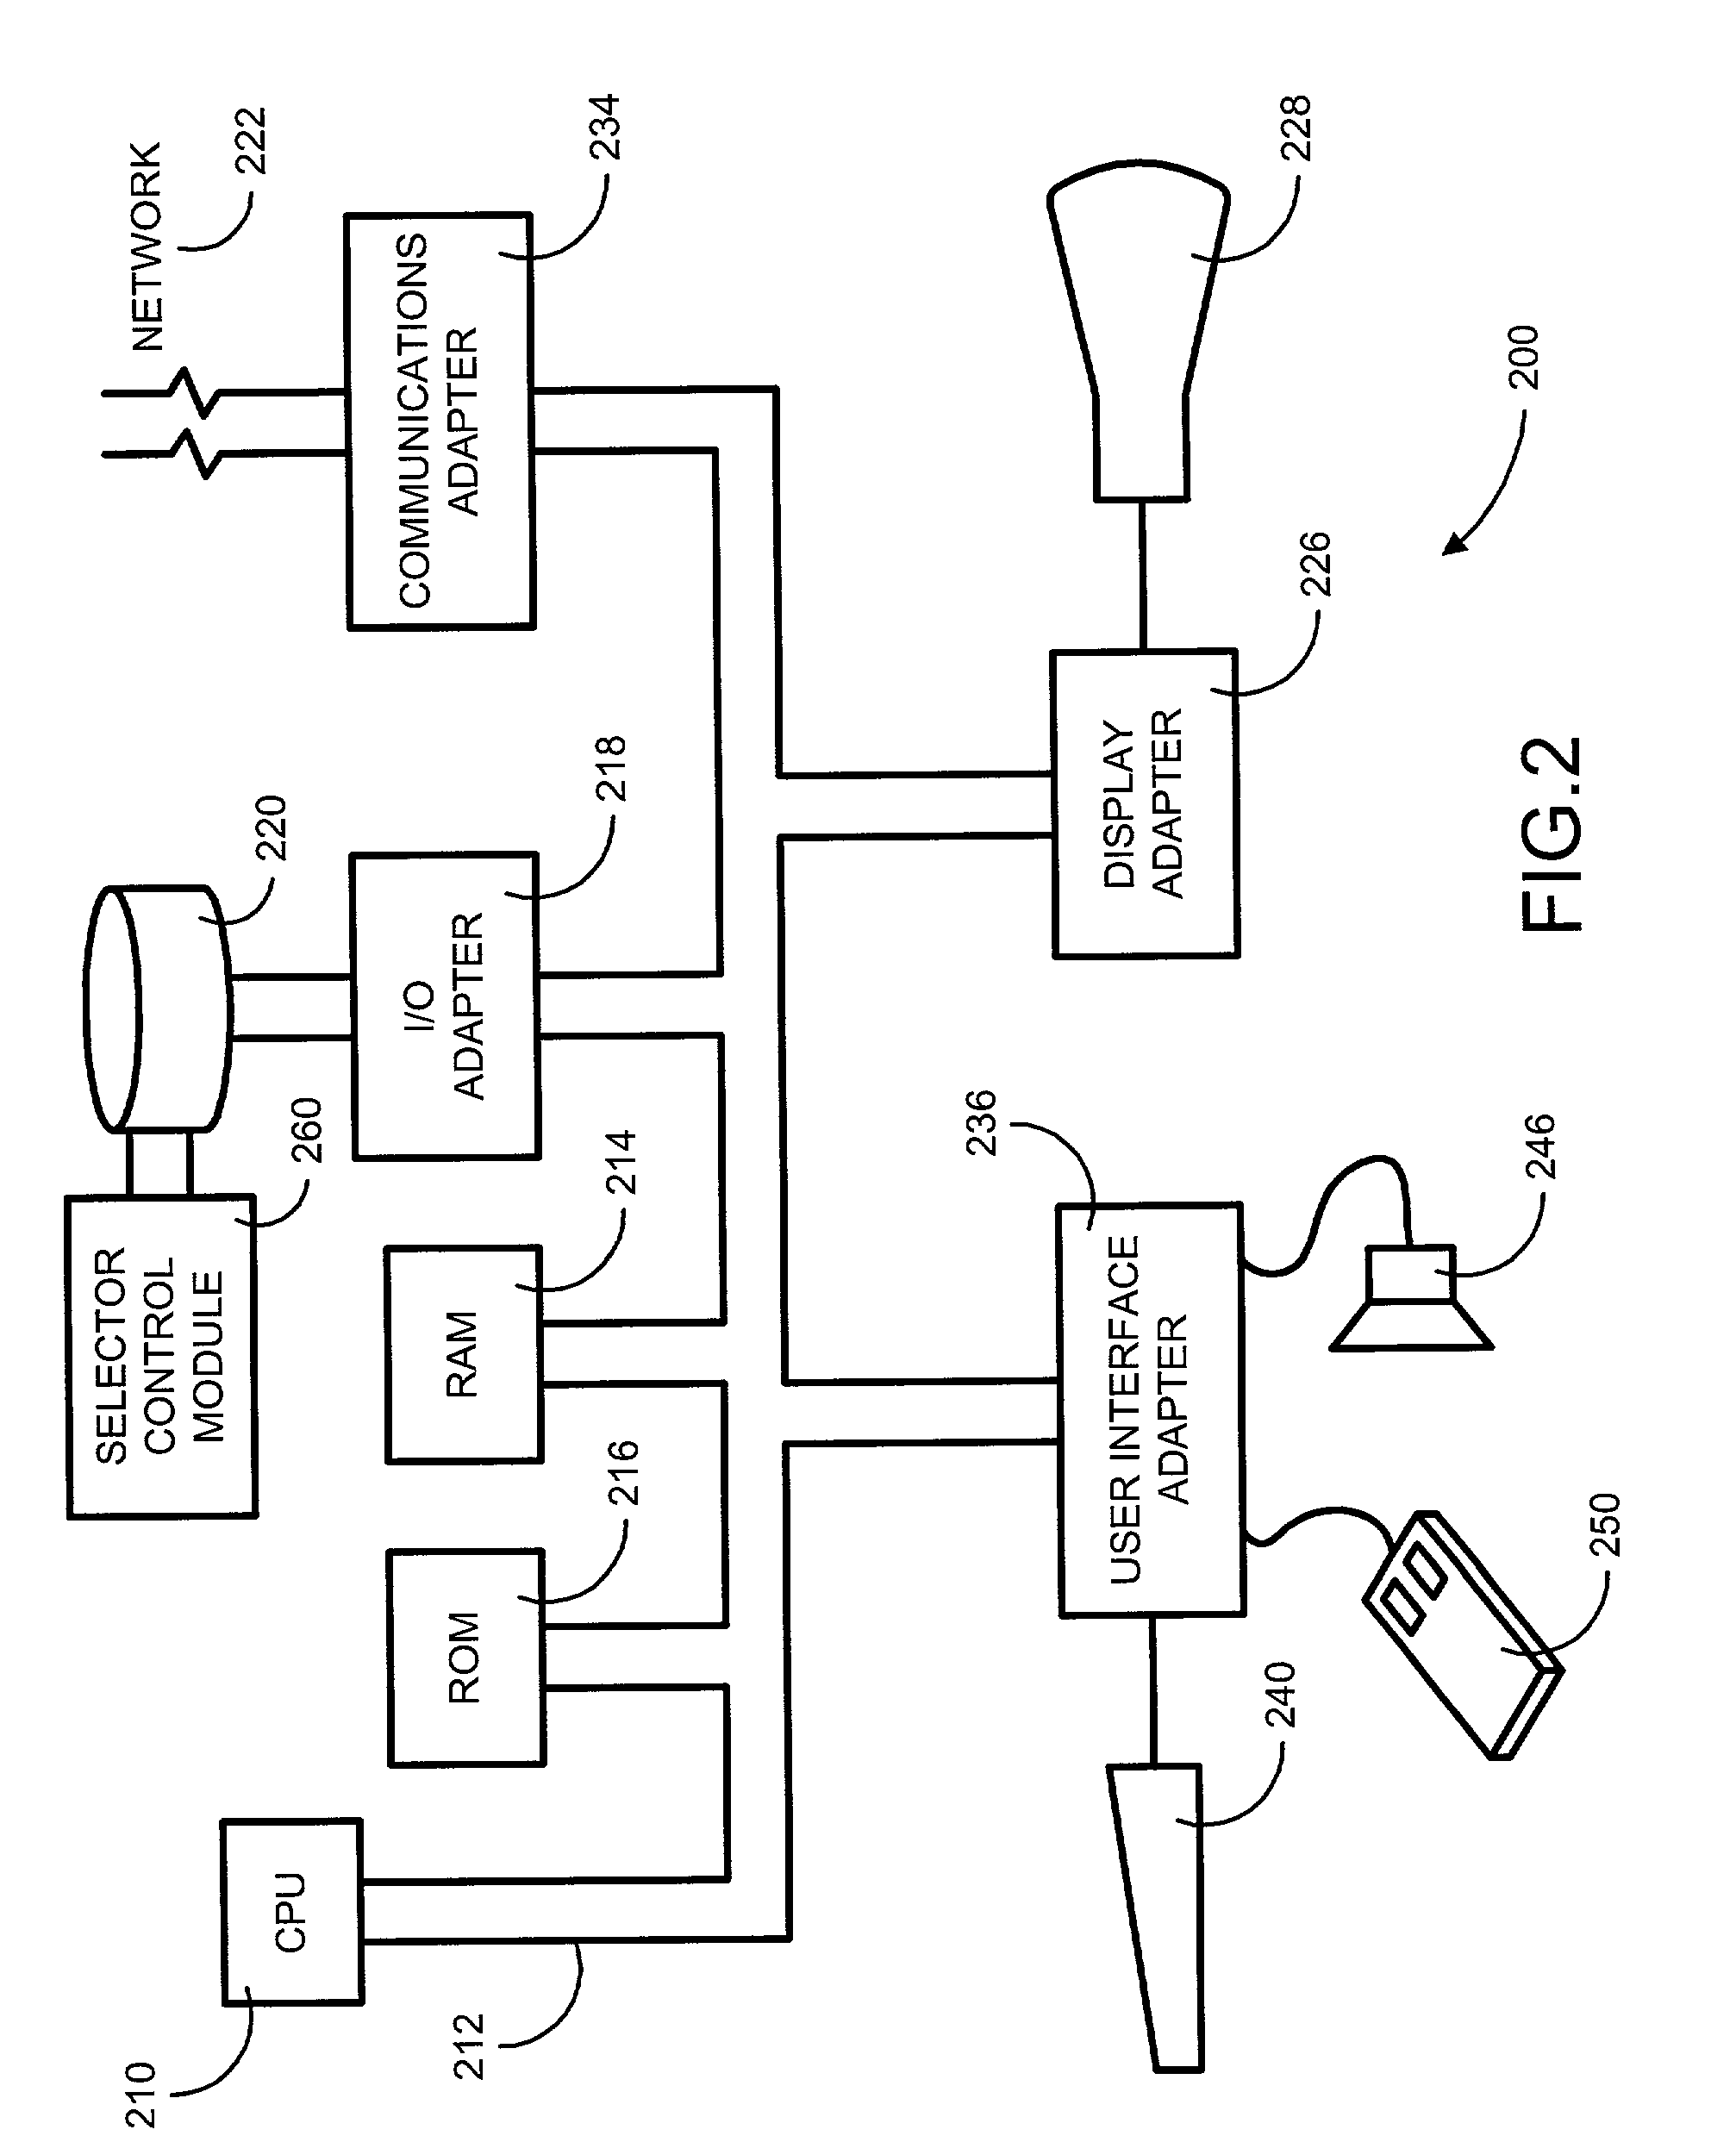 Unified diagnostics platform system and method for evaluating computer products